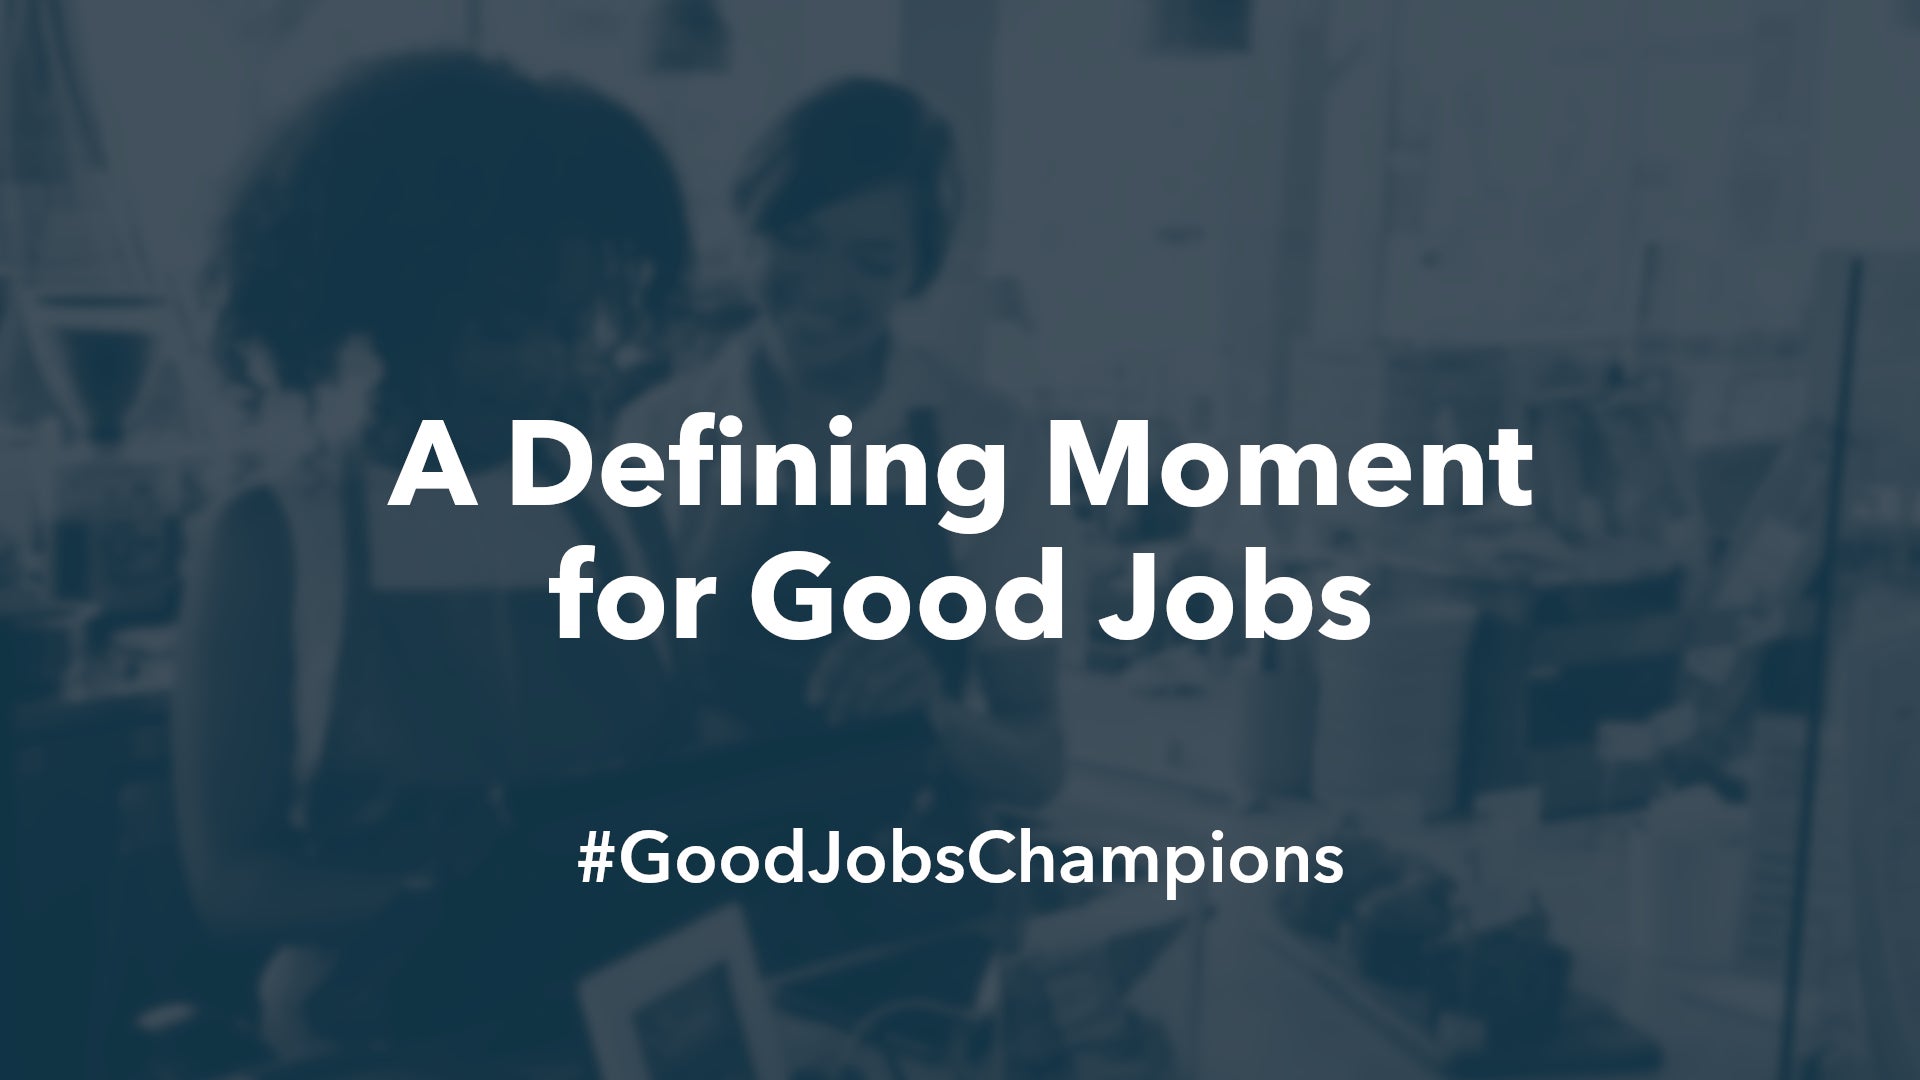 A Defining Moment for Good Jobs